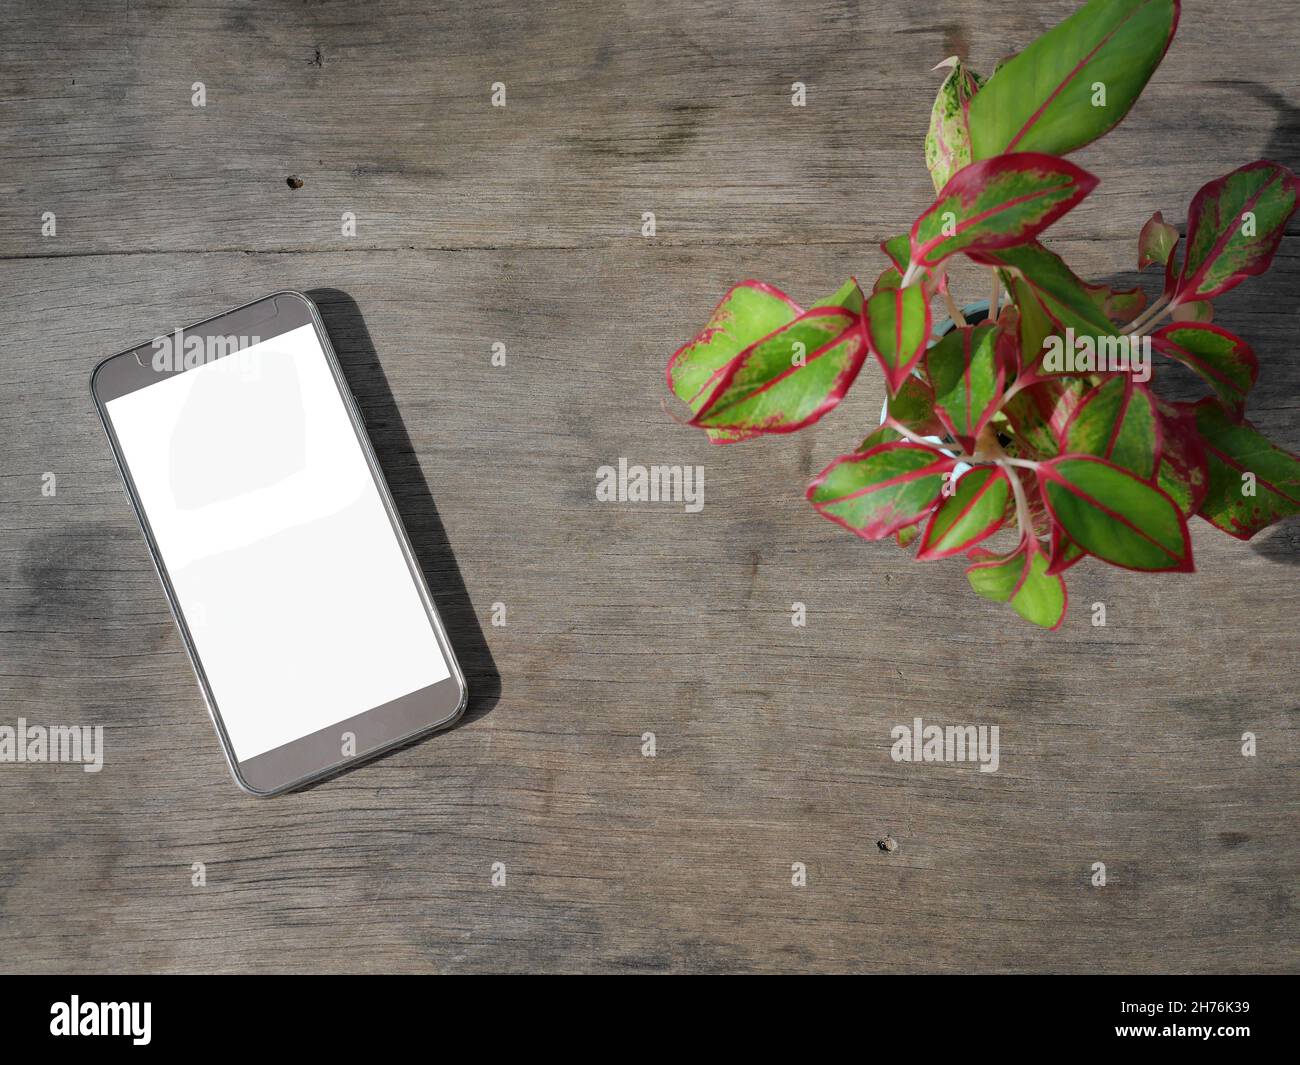 Smart phone with isolated white screen on brown wooden table with Chinese Evergreen plant or red Aglaonema plant tree , Communication technology Stock Photo